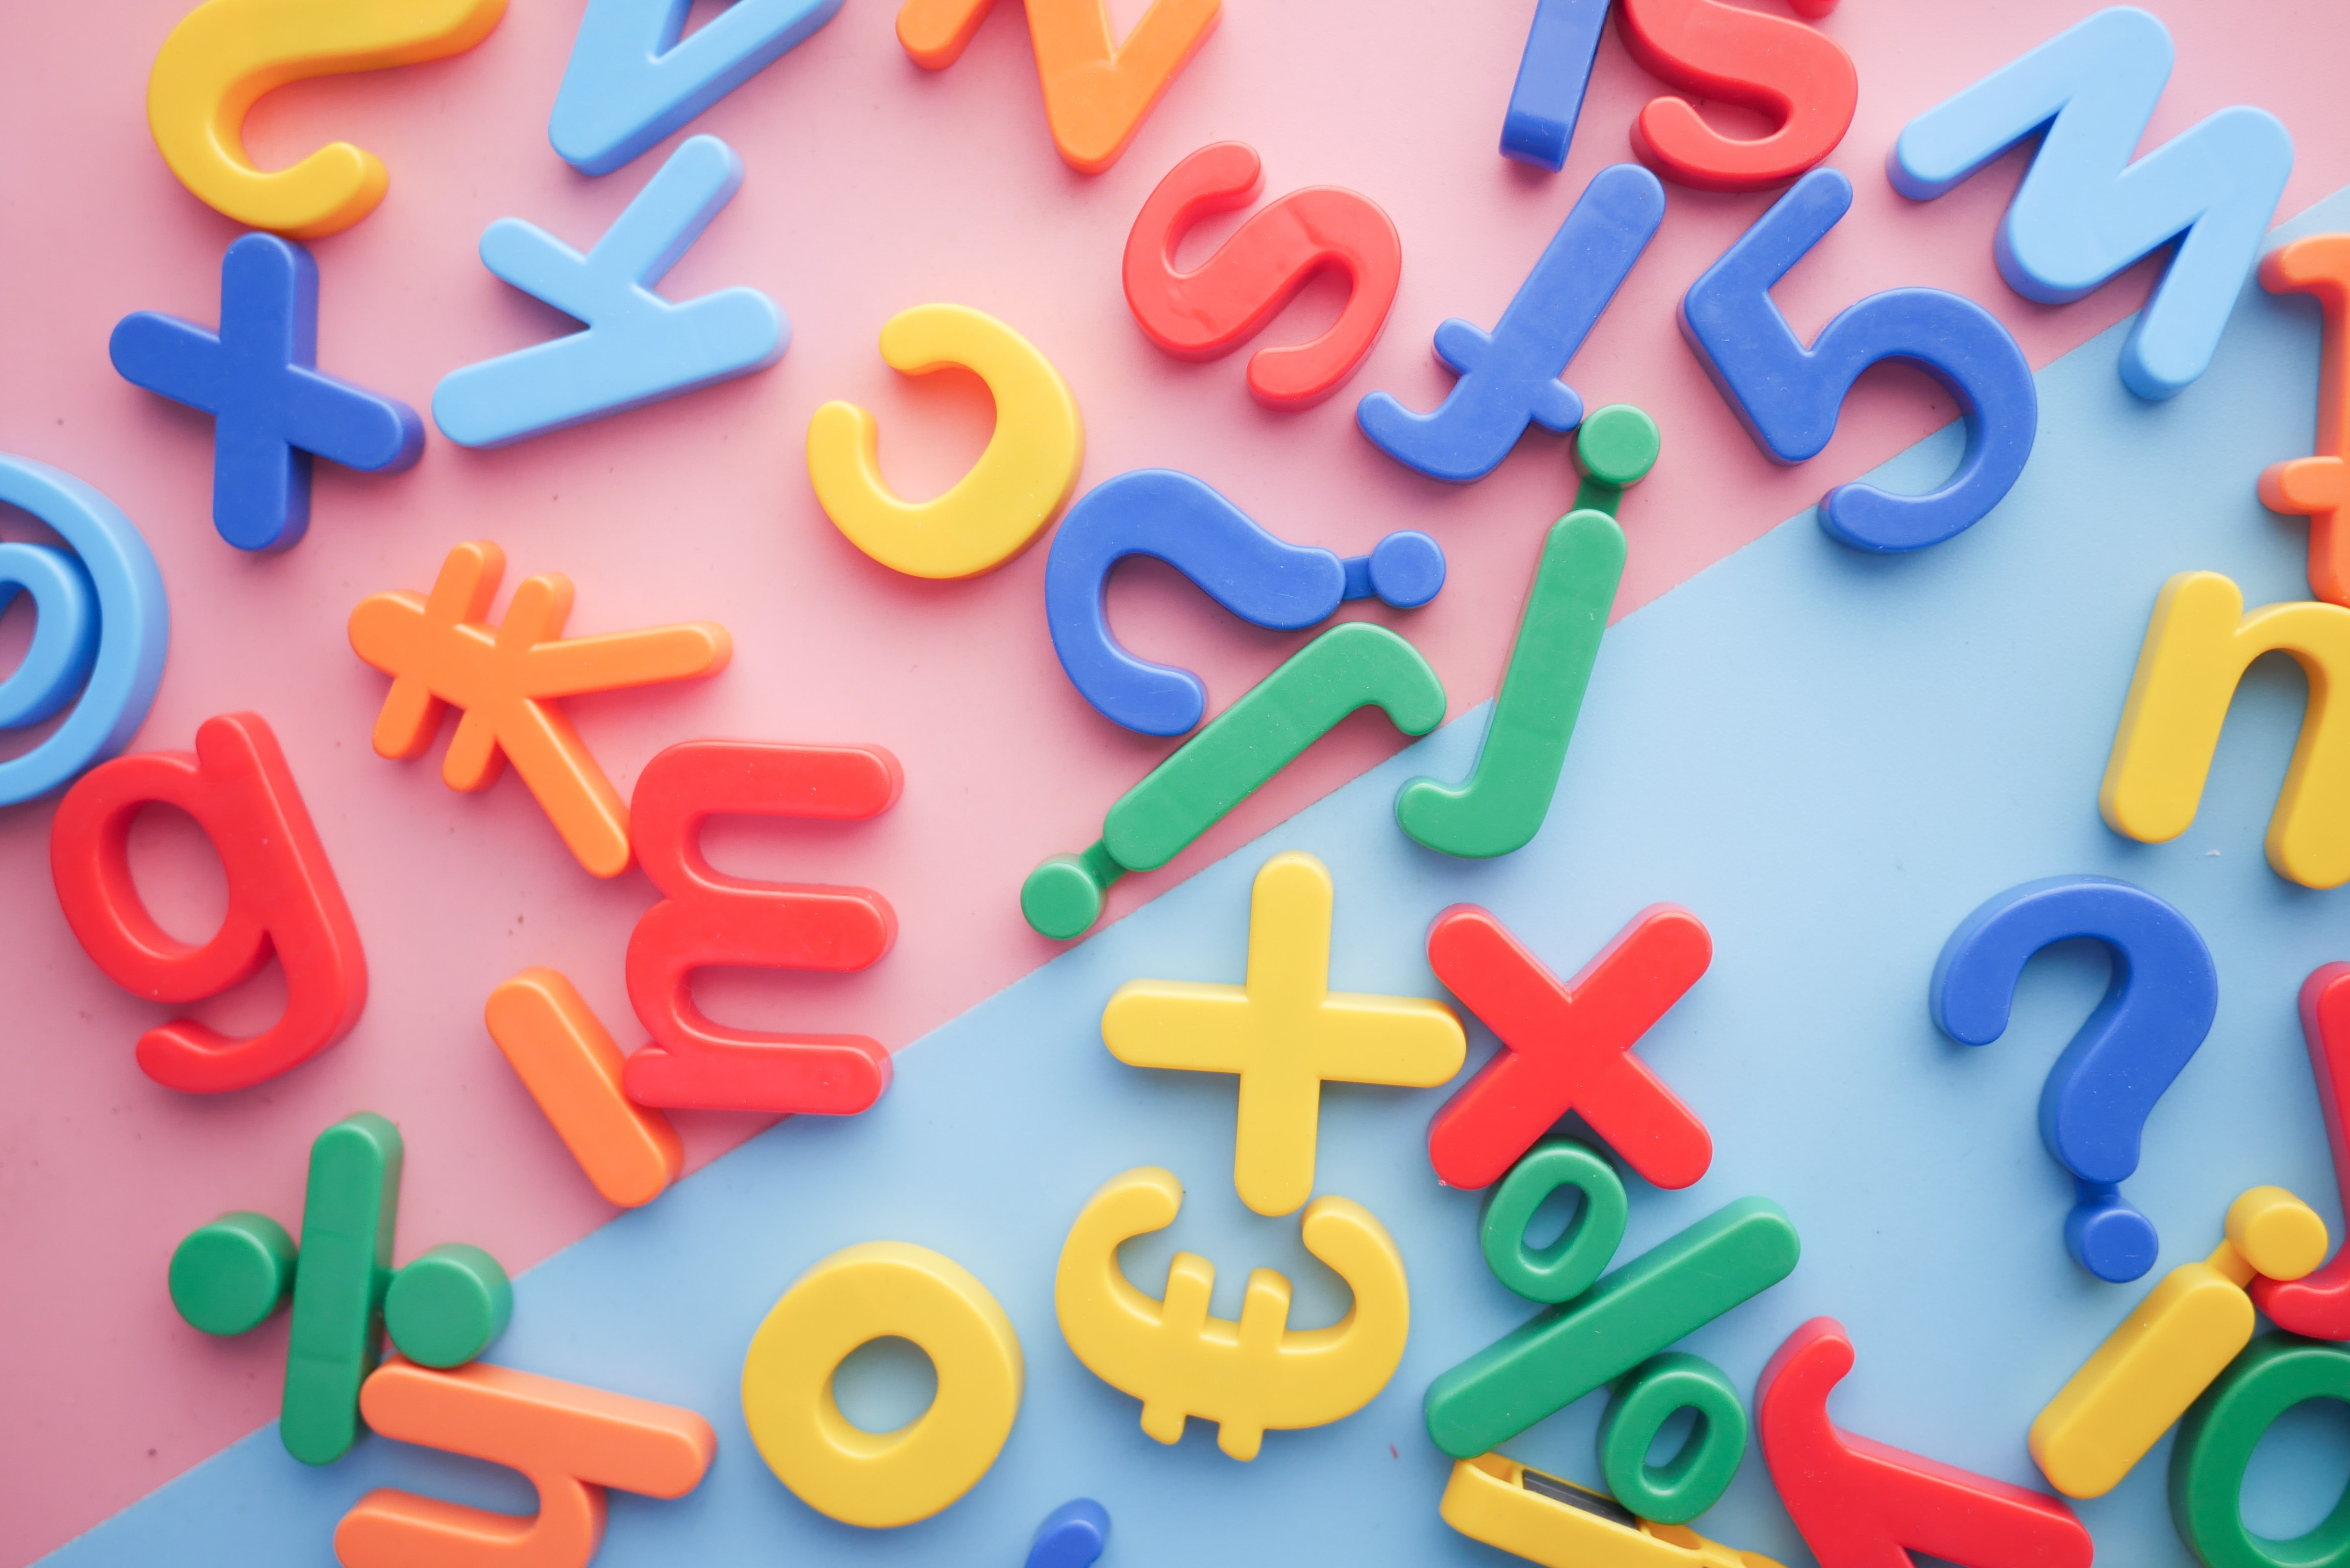 Colorful alphabets, numbers and other symbols on a pink and blue background